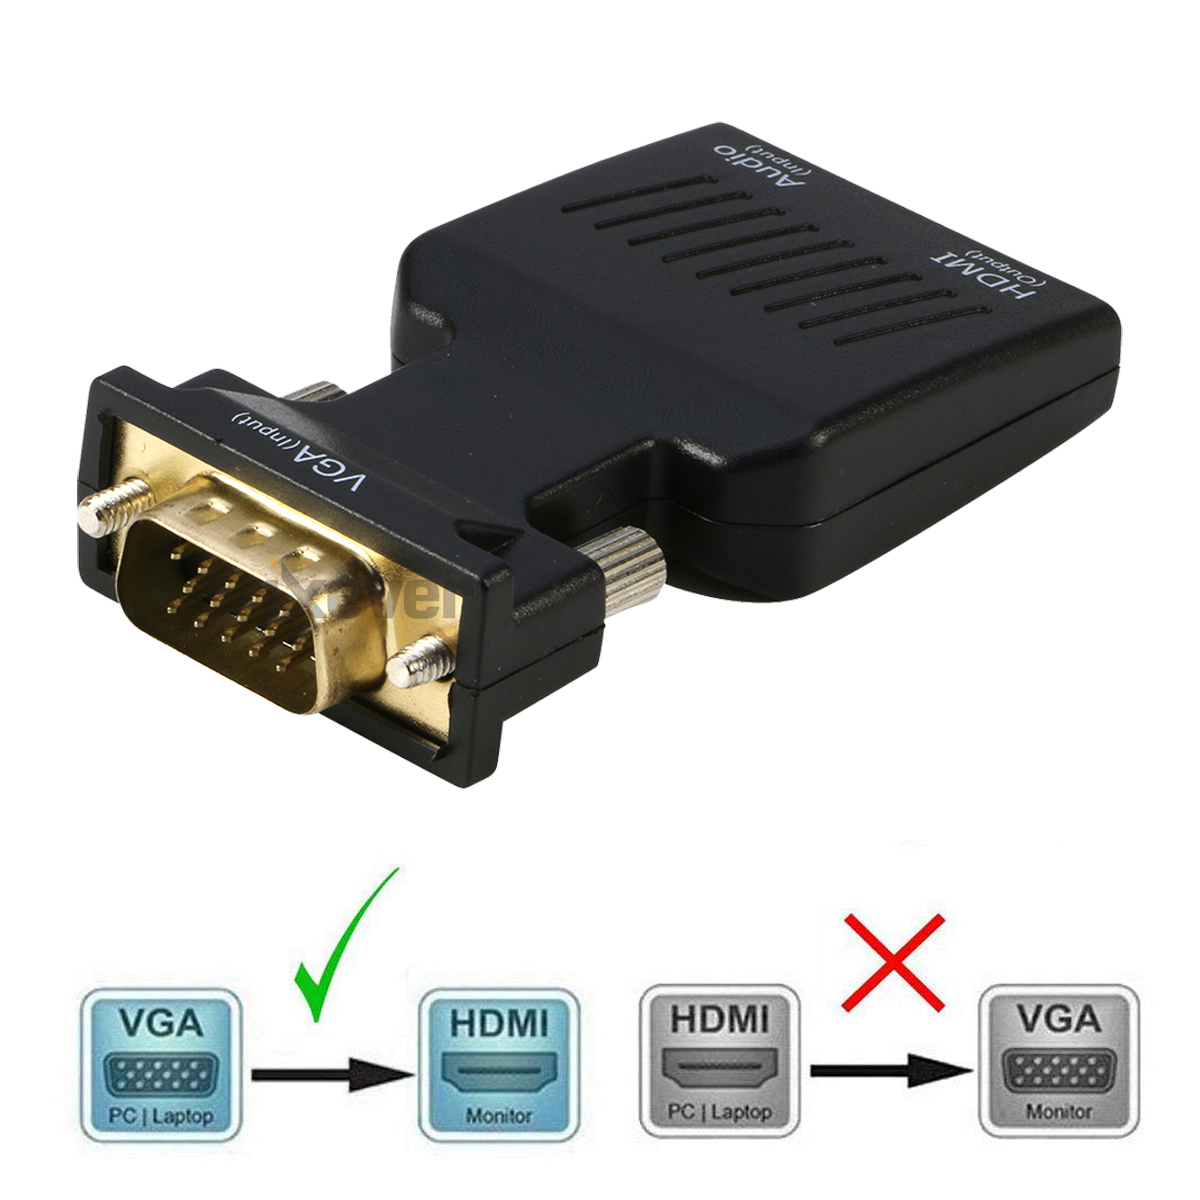 VGA to Video Adapter Converter with Audio for older computer laptop with VGA output to TV, or Projector with HDMI input